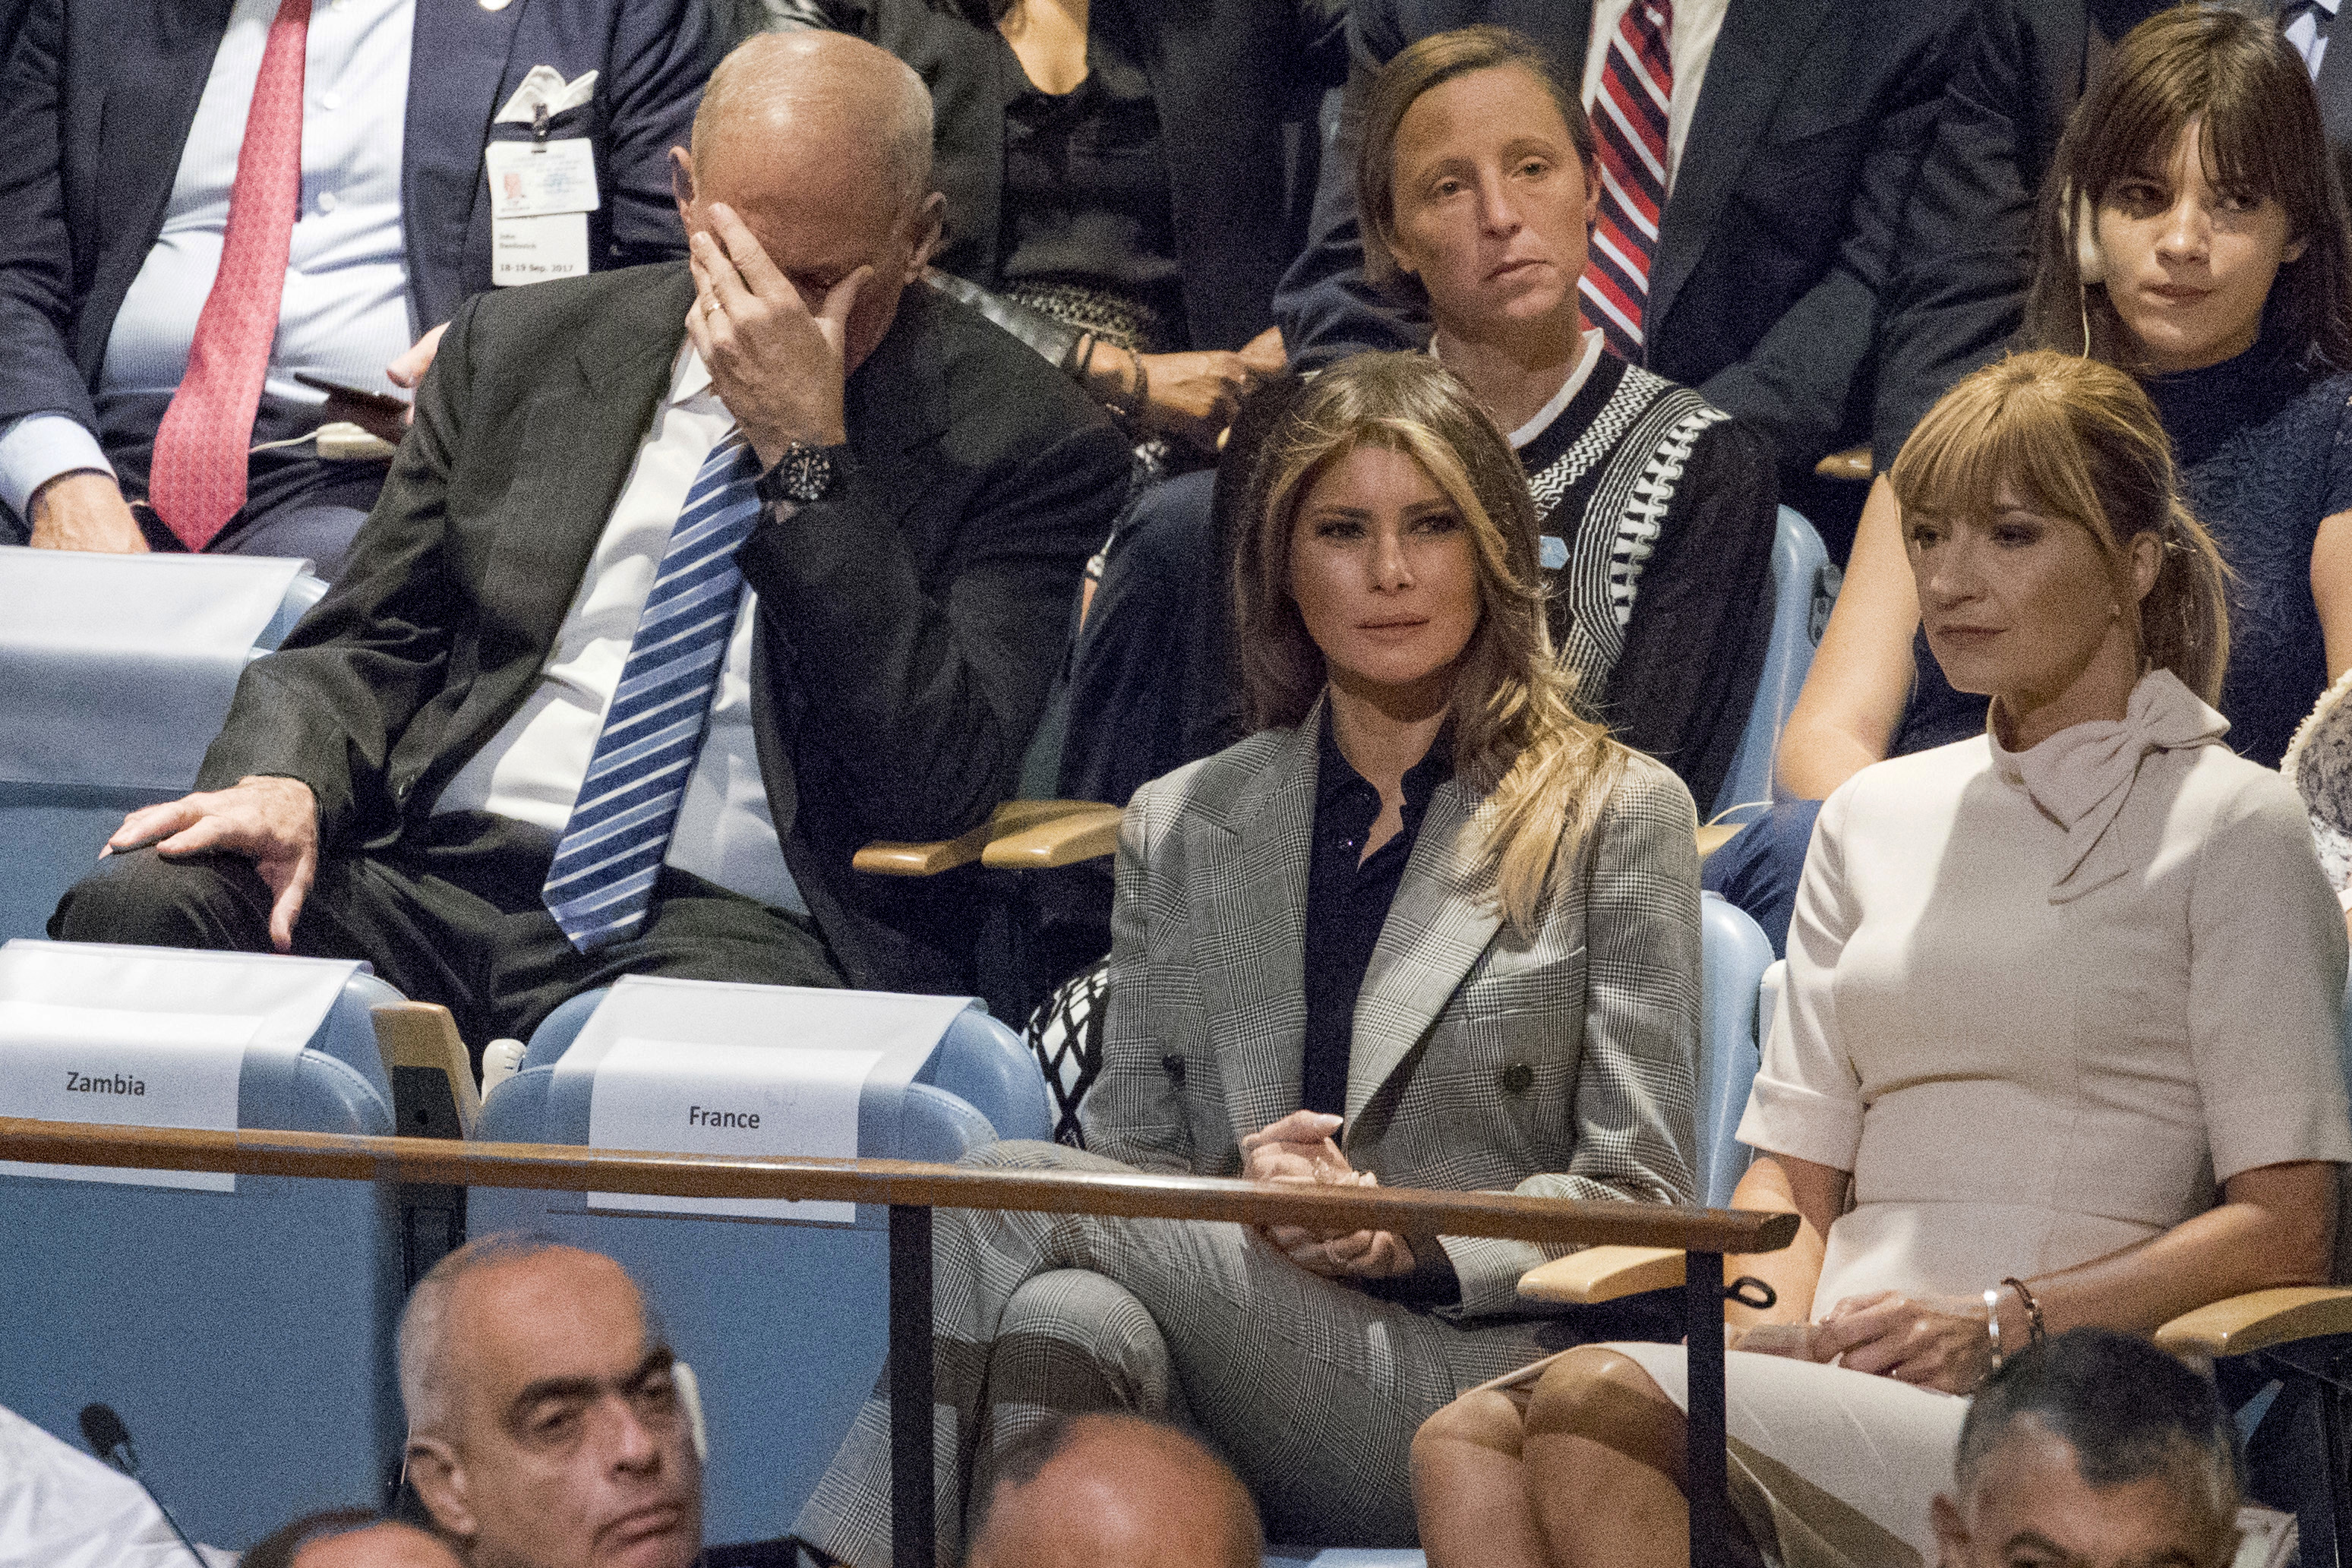 White House Chief of Staff John Kelly during President Donald Trump's speech at the 72nd session of the United Nations General Assembly at U.N. headquarters, Sept. 19, 2017. (Mary Altaffer—AP)